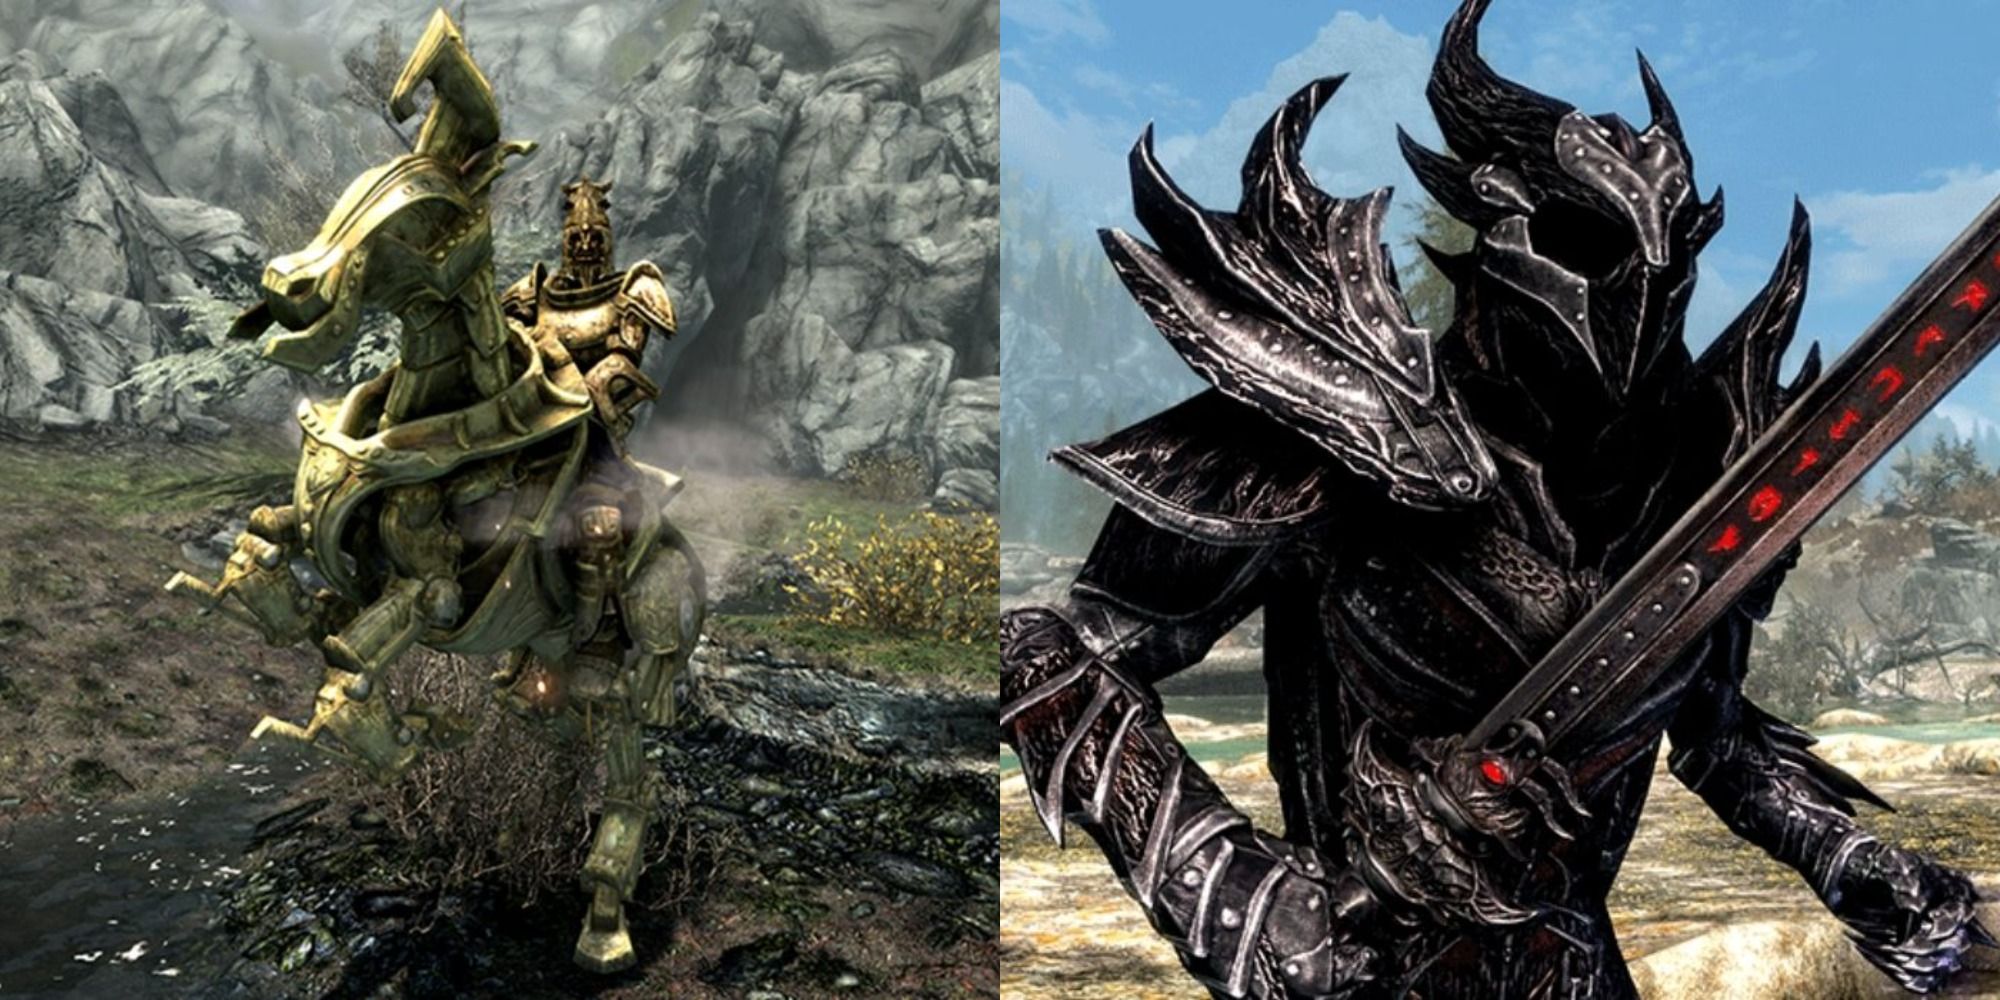 Split image showing a character aboard an automaton horse and another in full armor in Skyrim Anniversary Edition